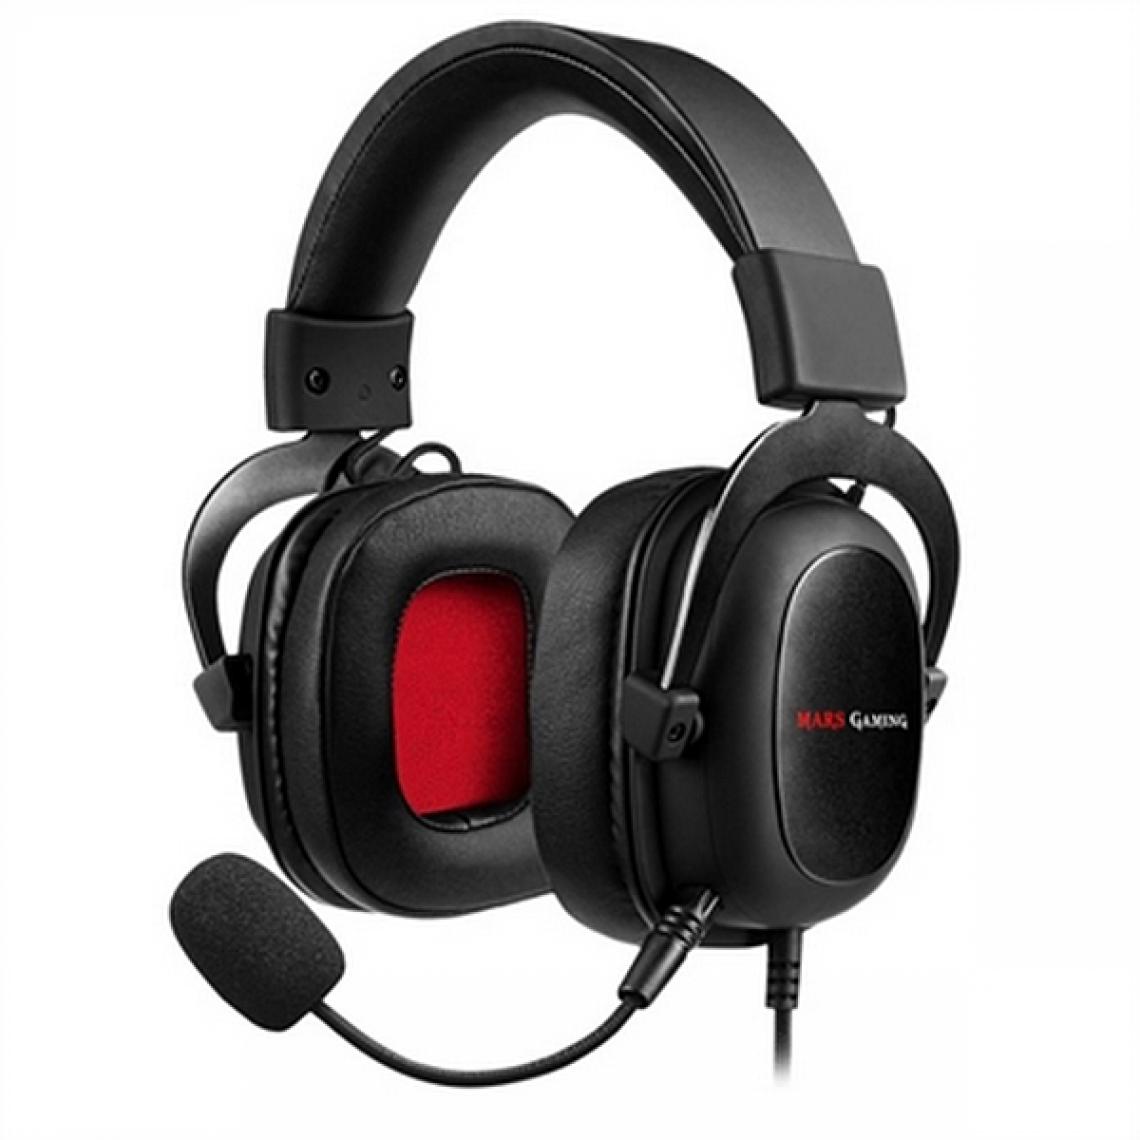 Mars Gaming - Casques avec Micro Gaming Mars Gaming MH5 (3.5 mm) Noir - Micro-Casque